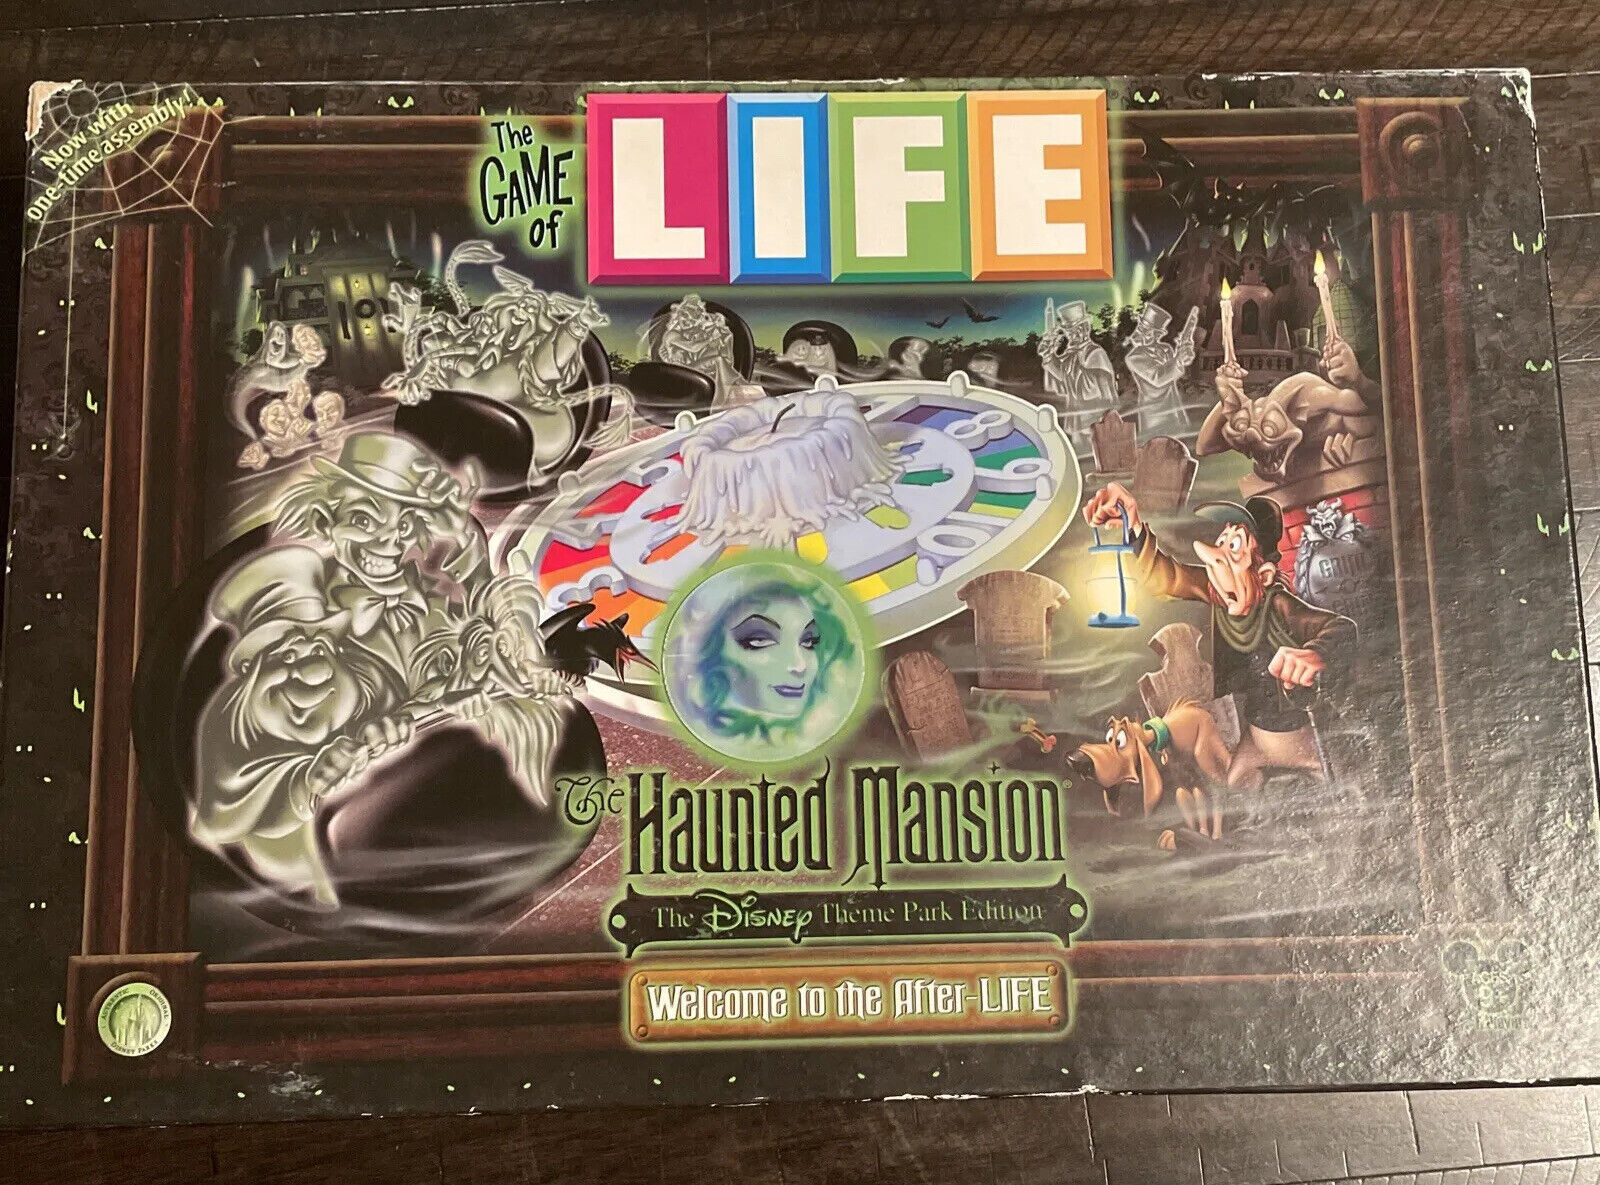 2010 The Game of LIFE: The Haunted Mansion Disney Theme Park Edition  COMPLETE